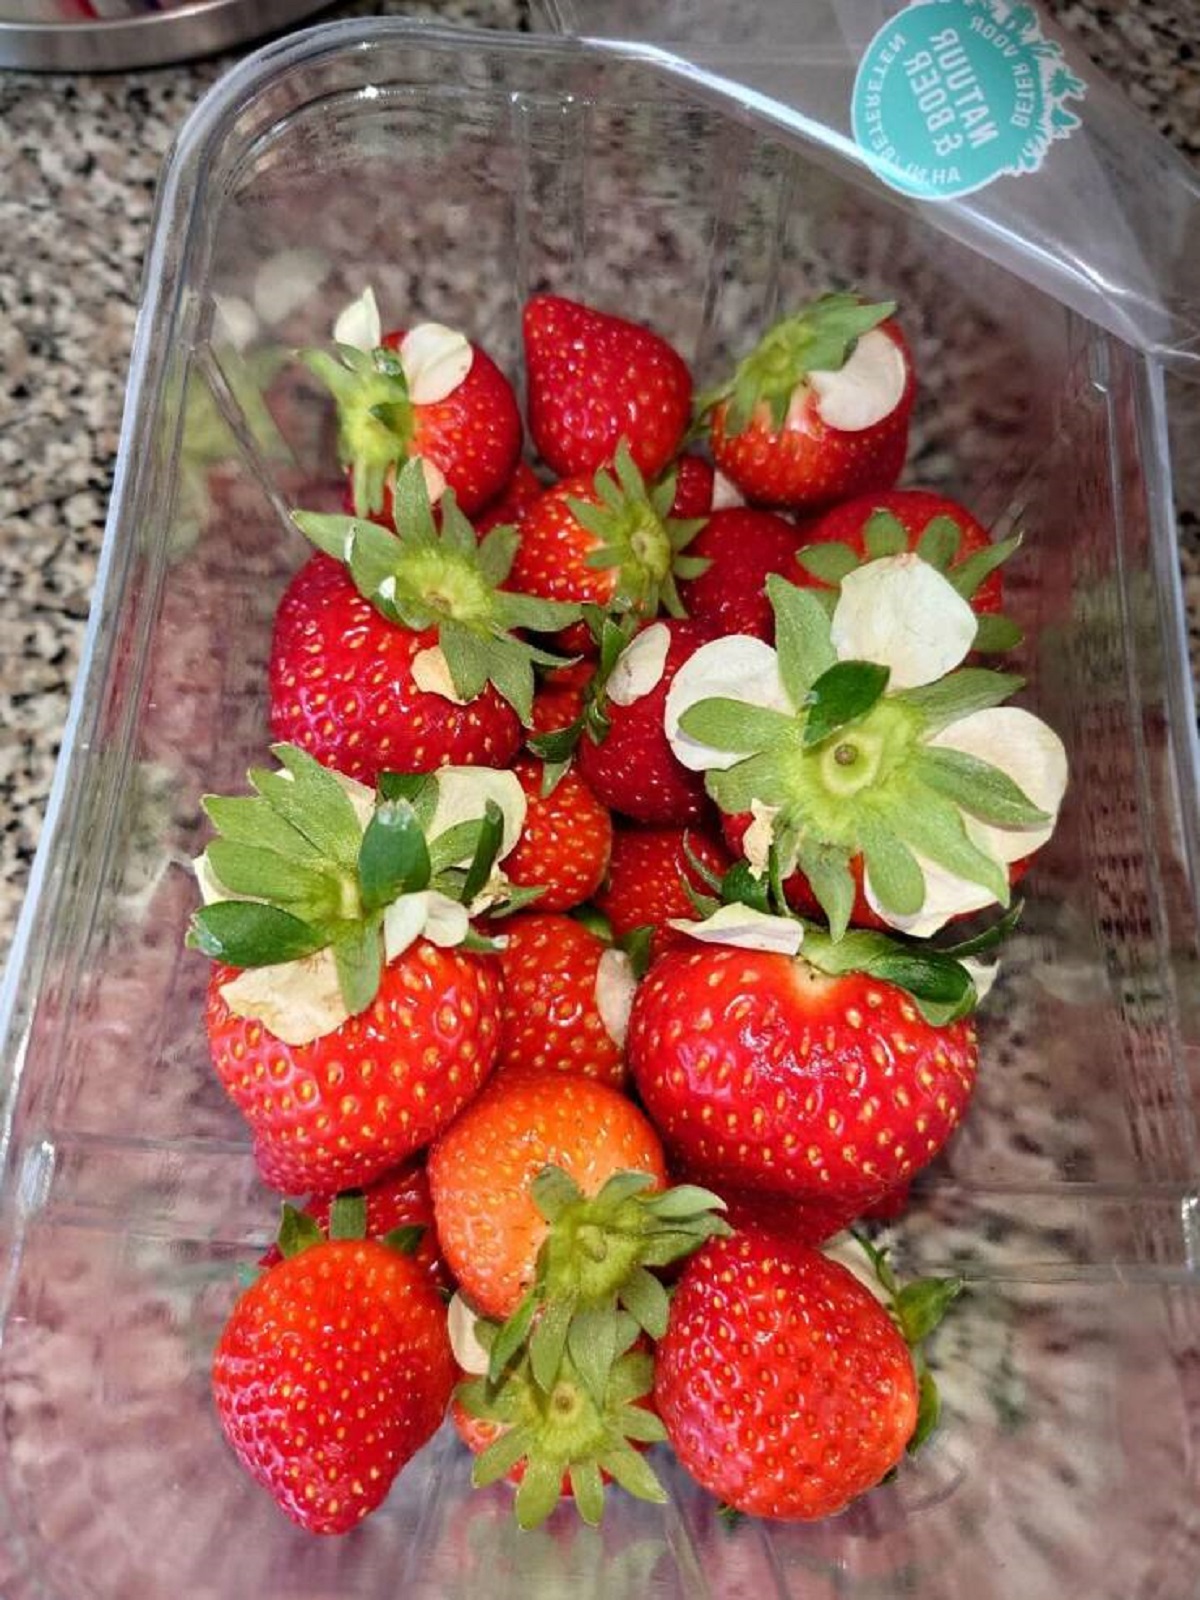 "Almost all my store-bought strawberries still had the flowers attached to them"